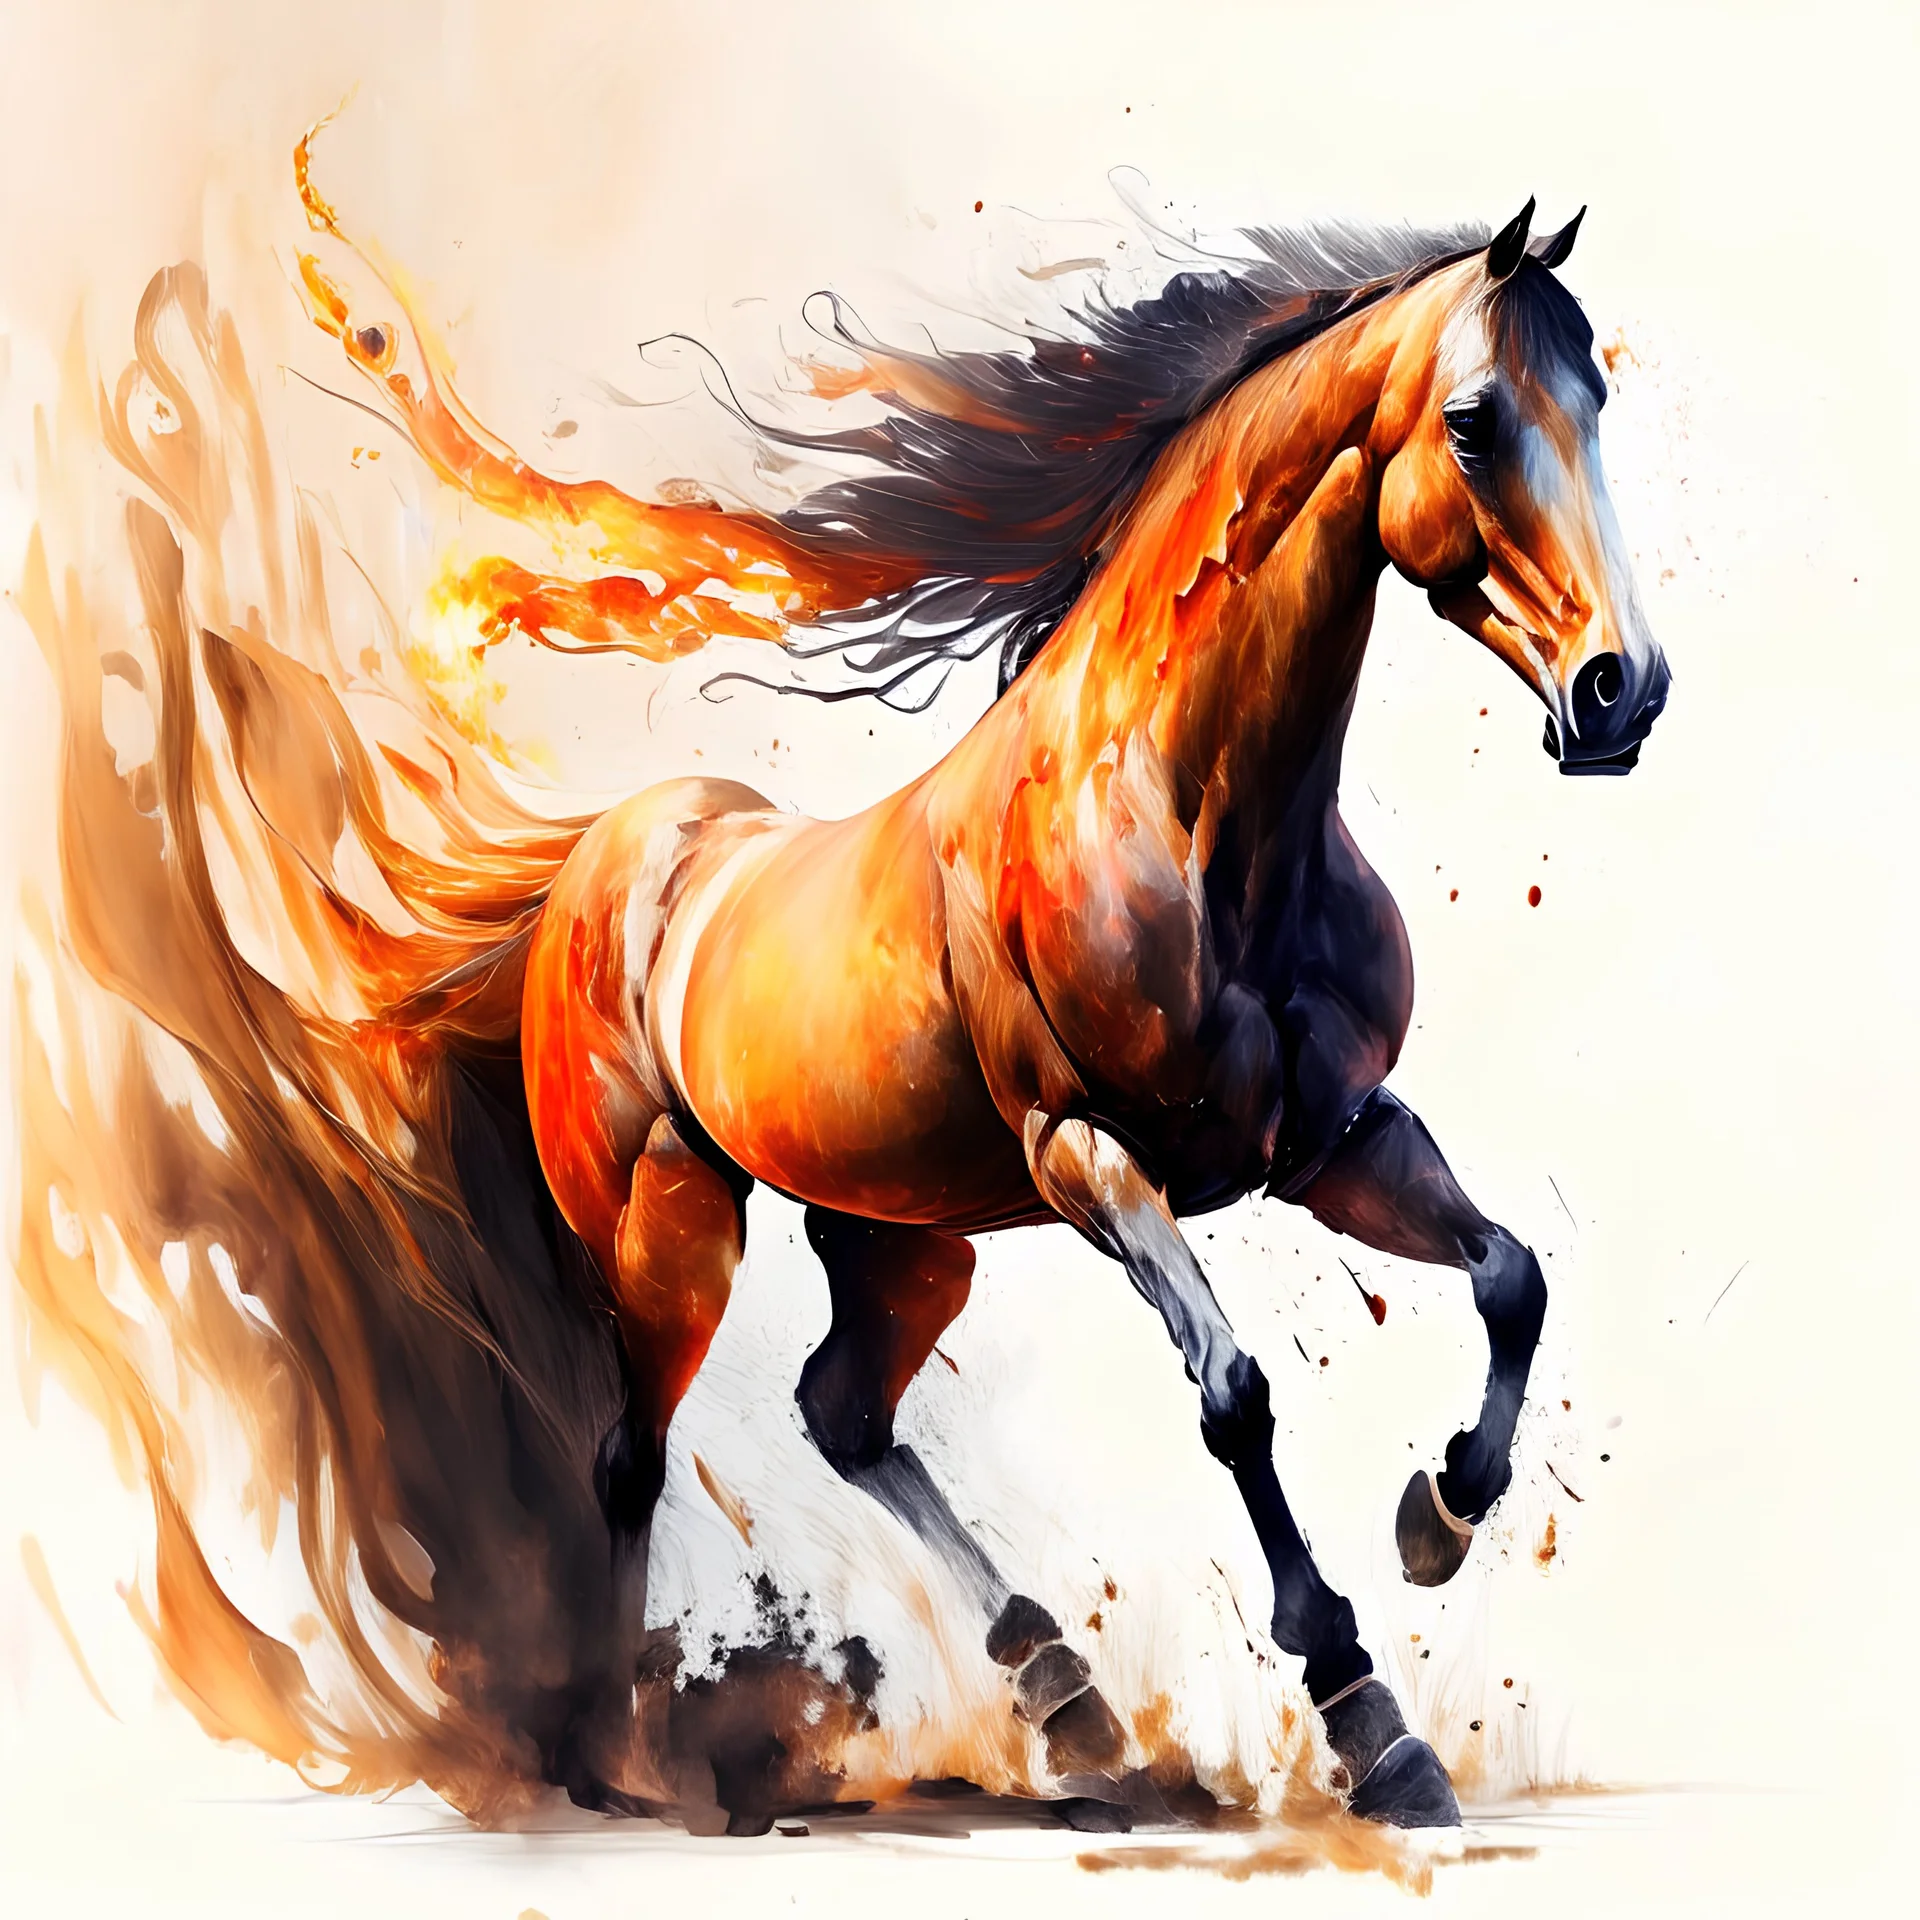 painting whit fiery horse in without background